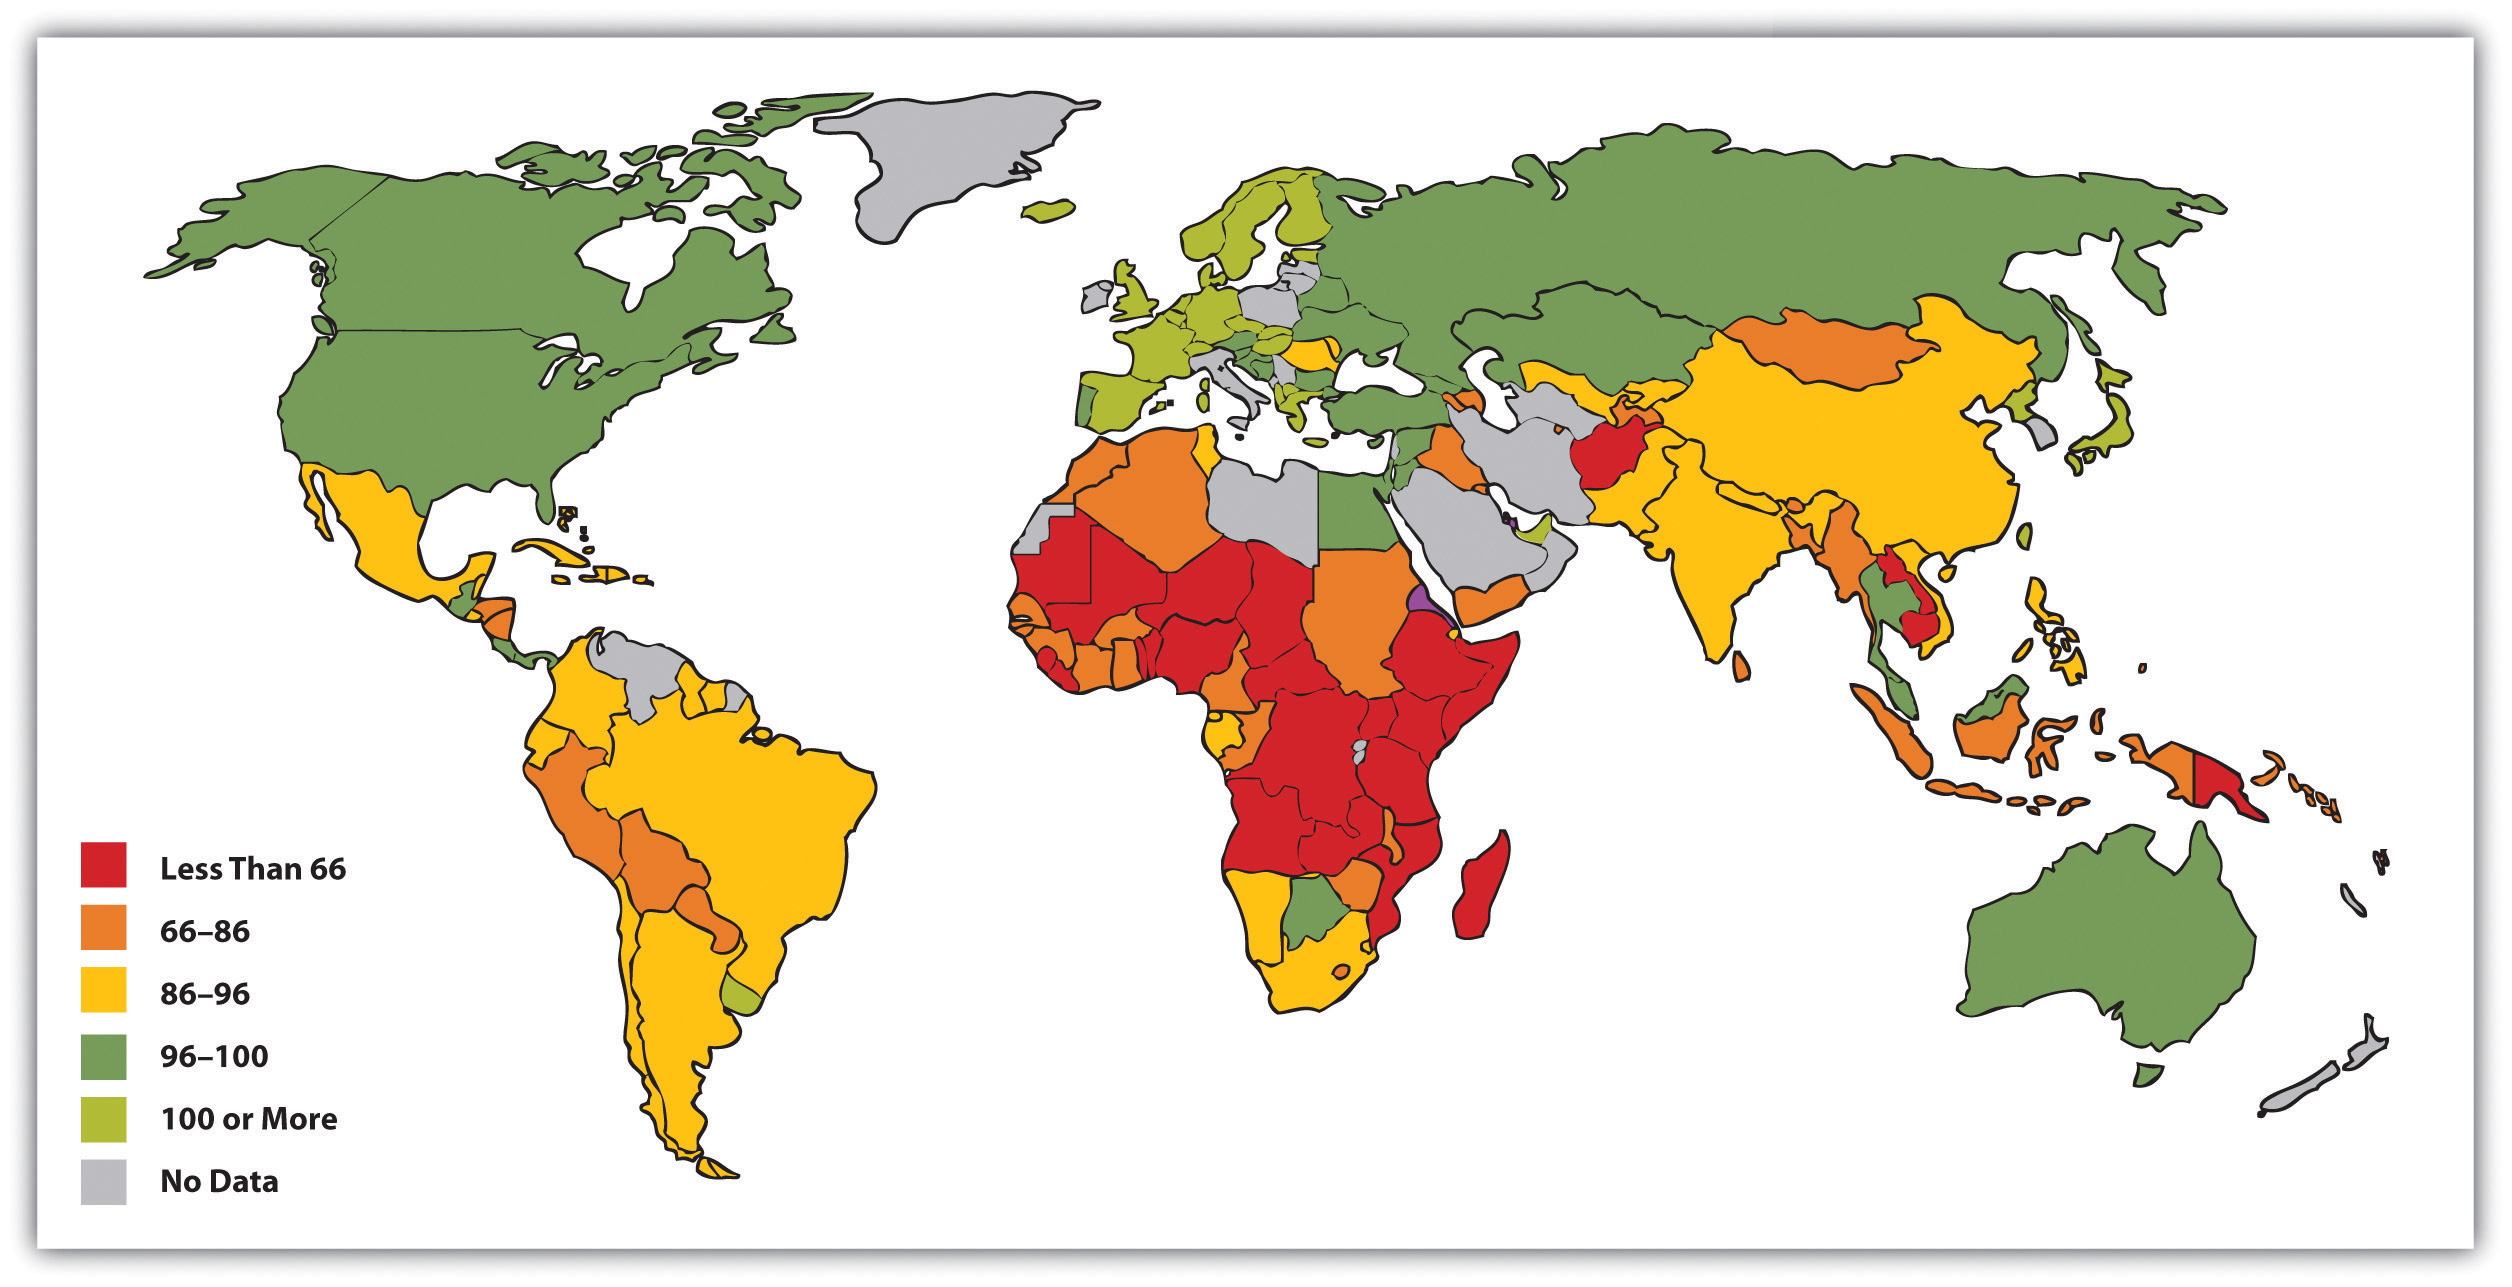 Percentage of Population with access to adequate sanitation facilities, 2008